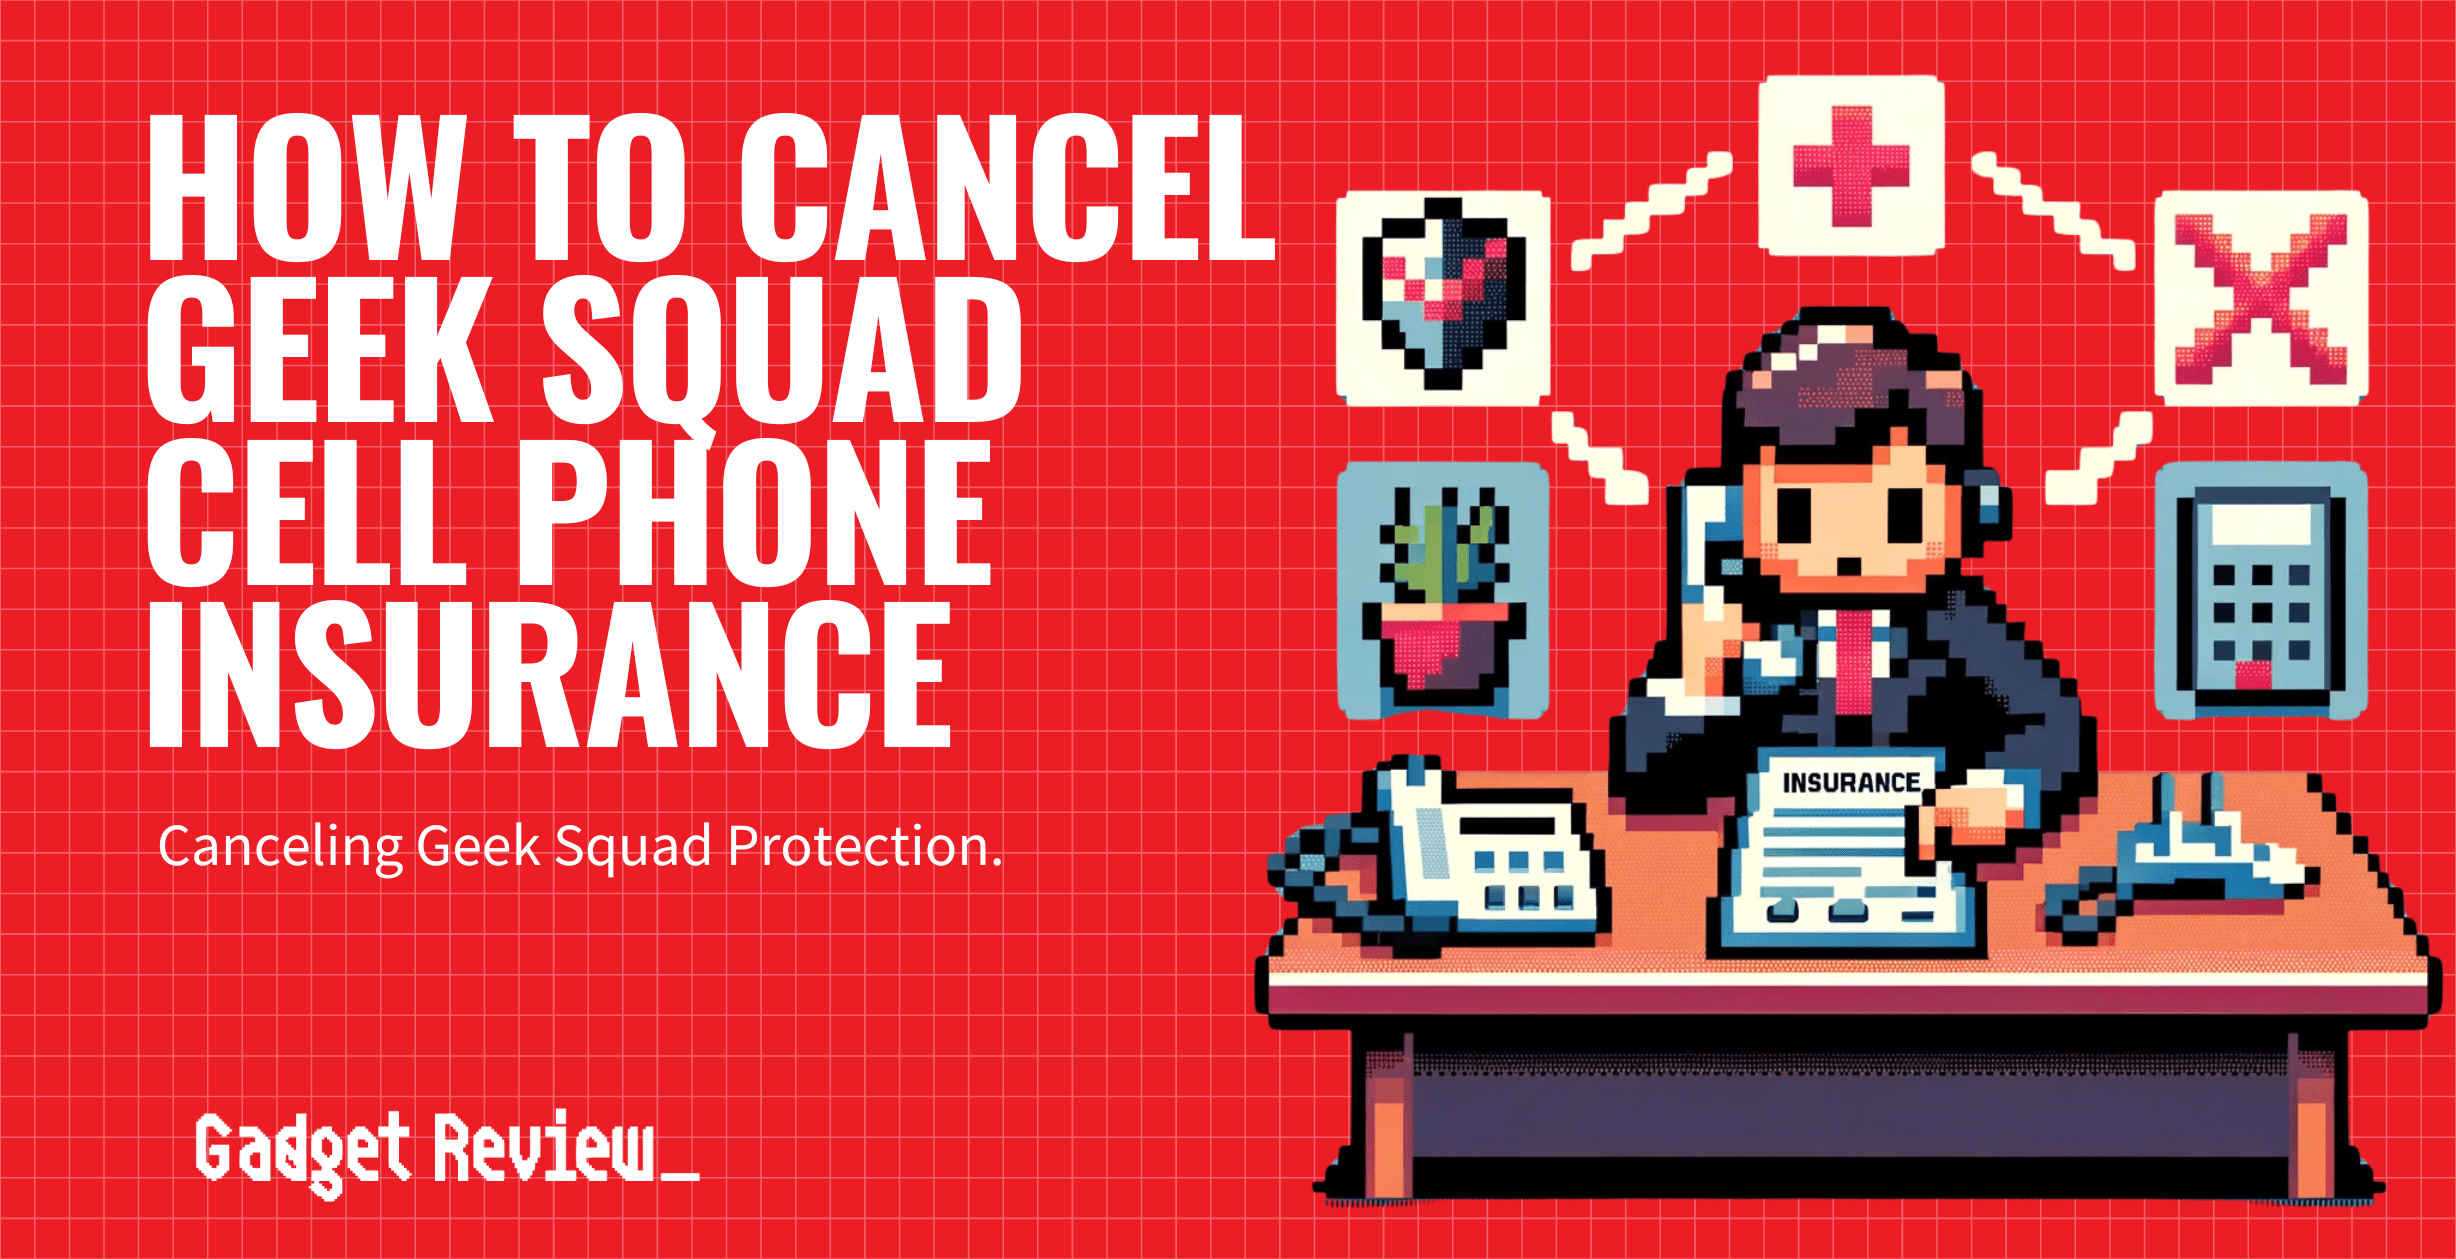 How to Cancel Geek Squad Cell Phone Insurance